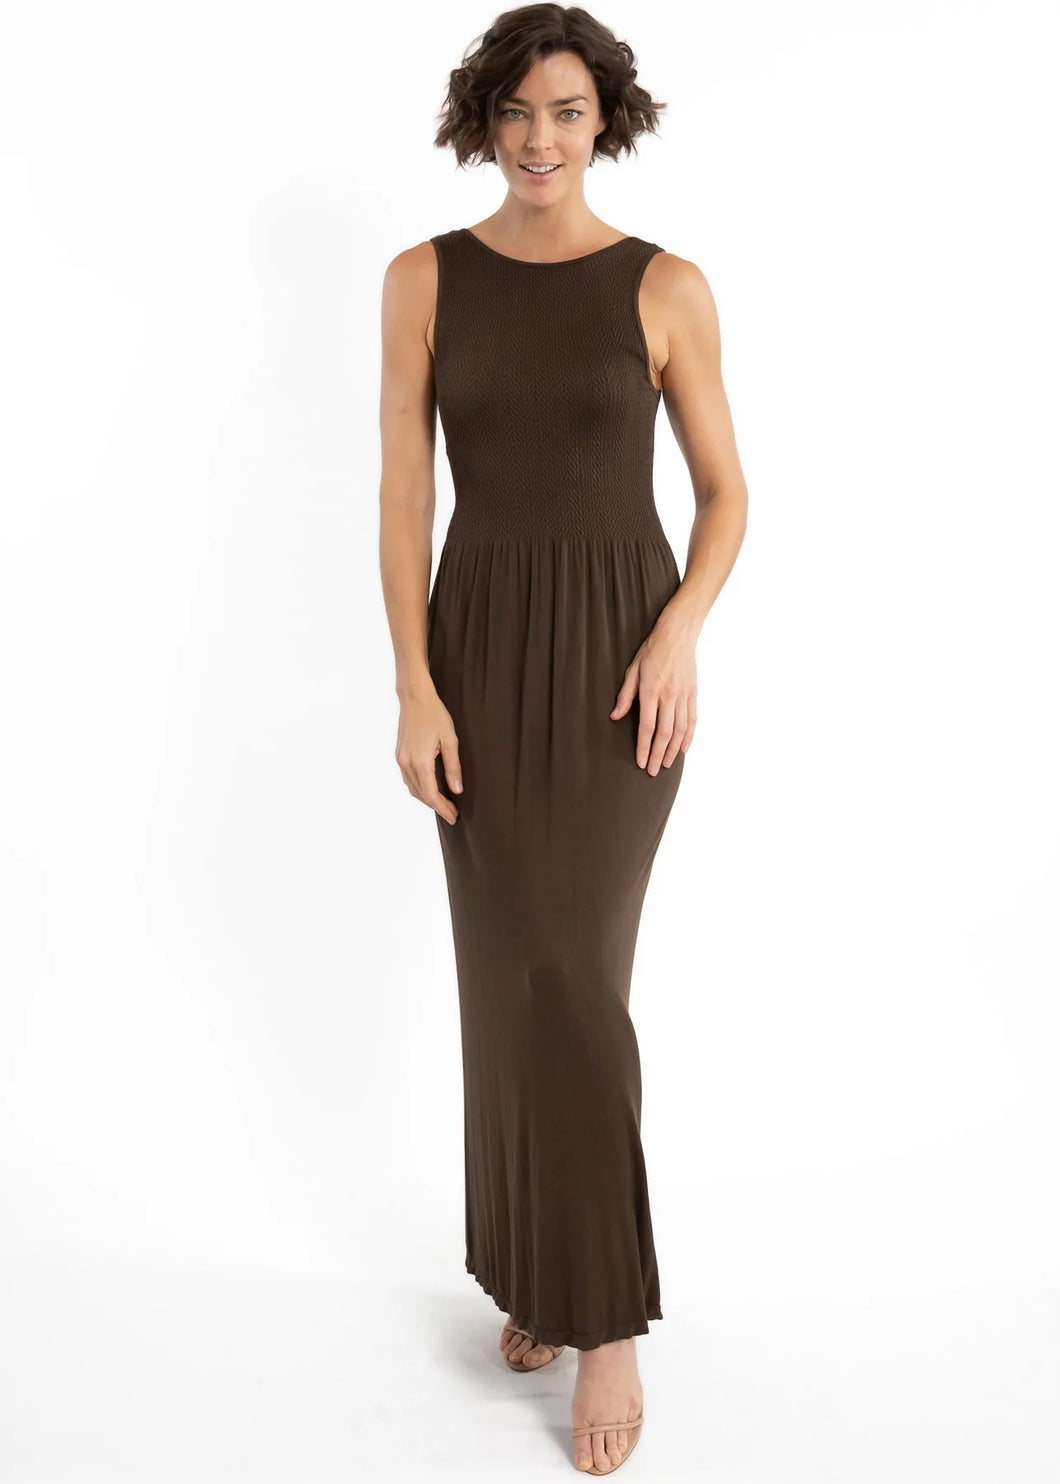 ELIETIAN SOLID WIDE STRAP MAXI DRESS WITH SCOOP COLLAR ONE SIZE